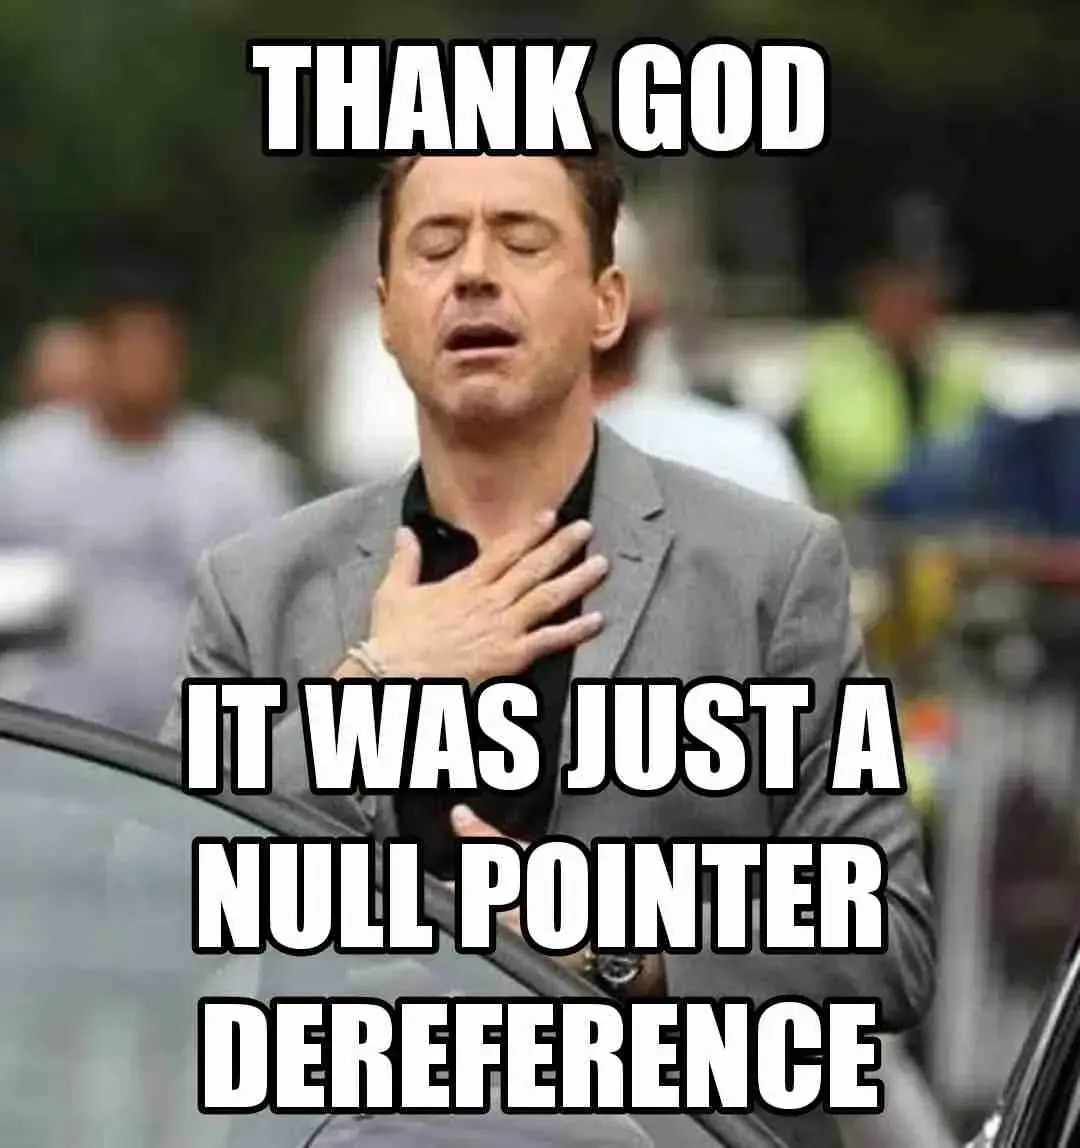 Meme picturing a relieved man, with text reading "Thank god. It was just a null pointer dereference."